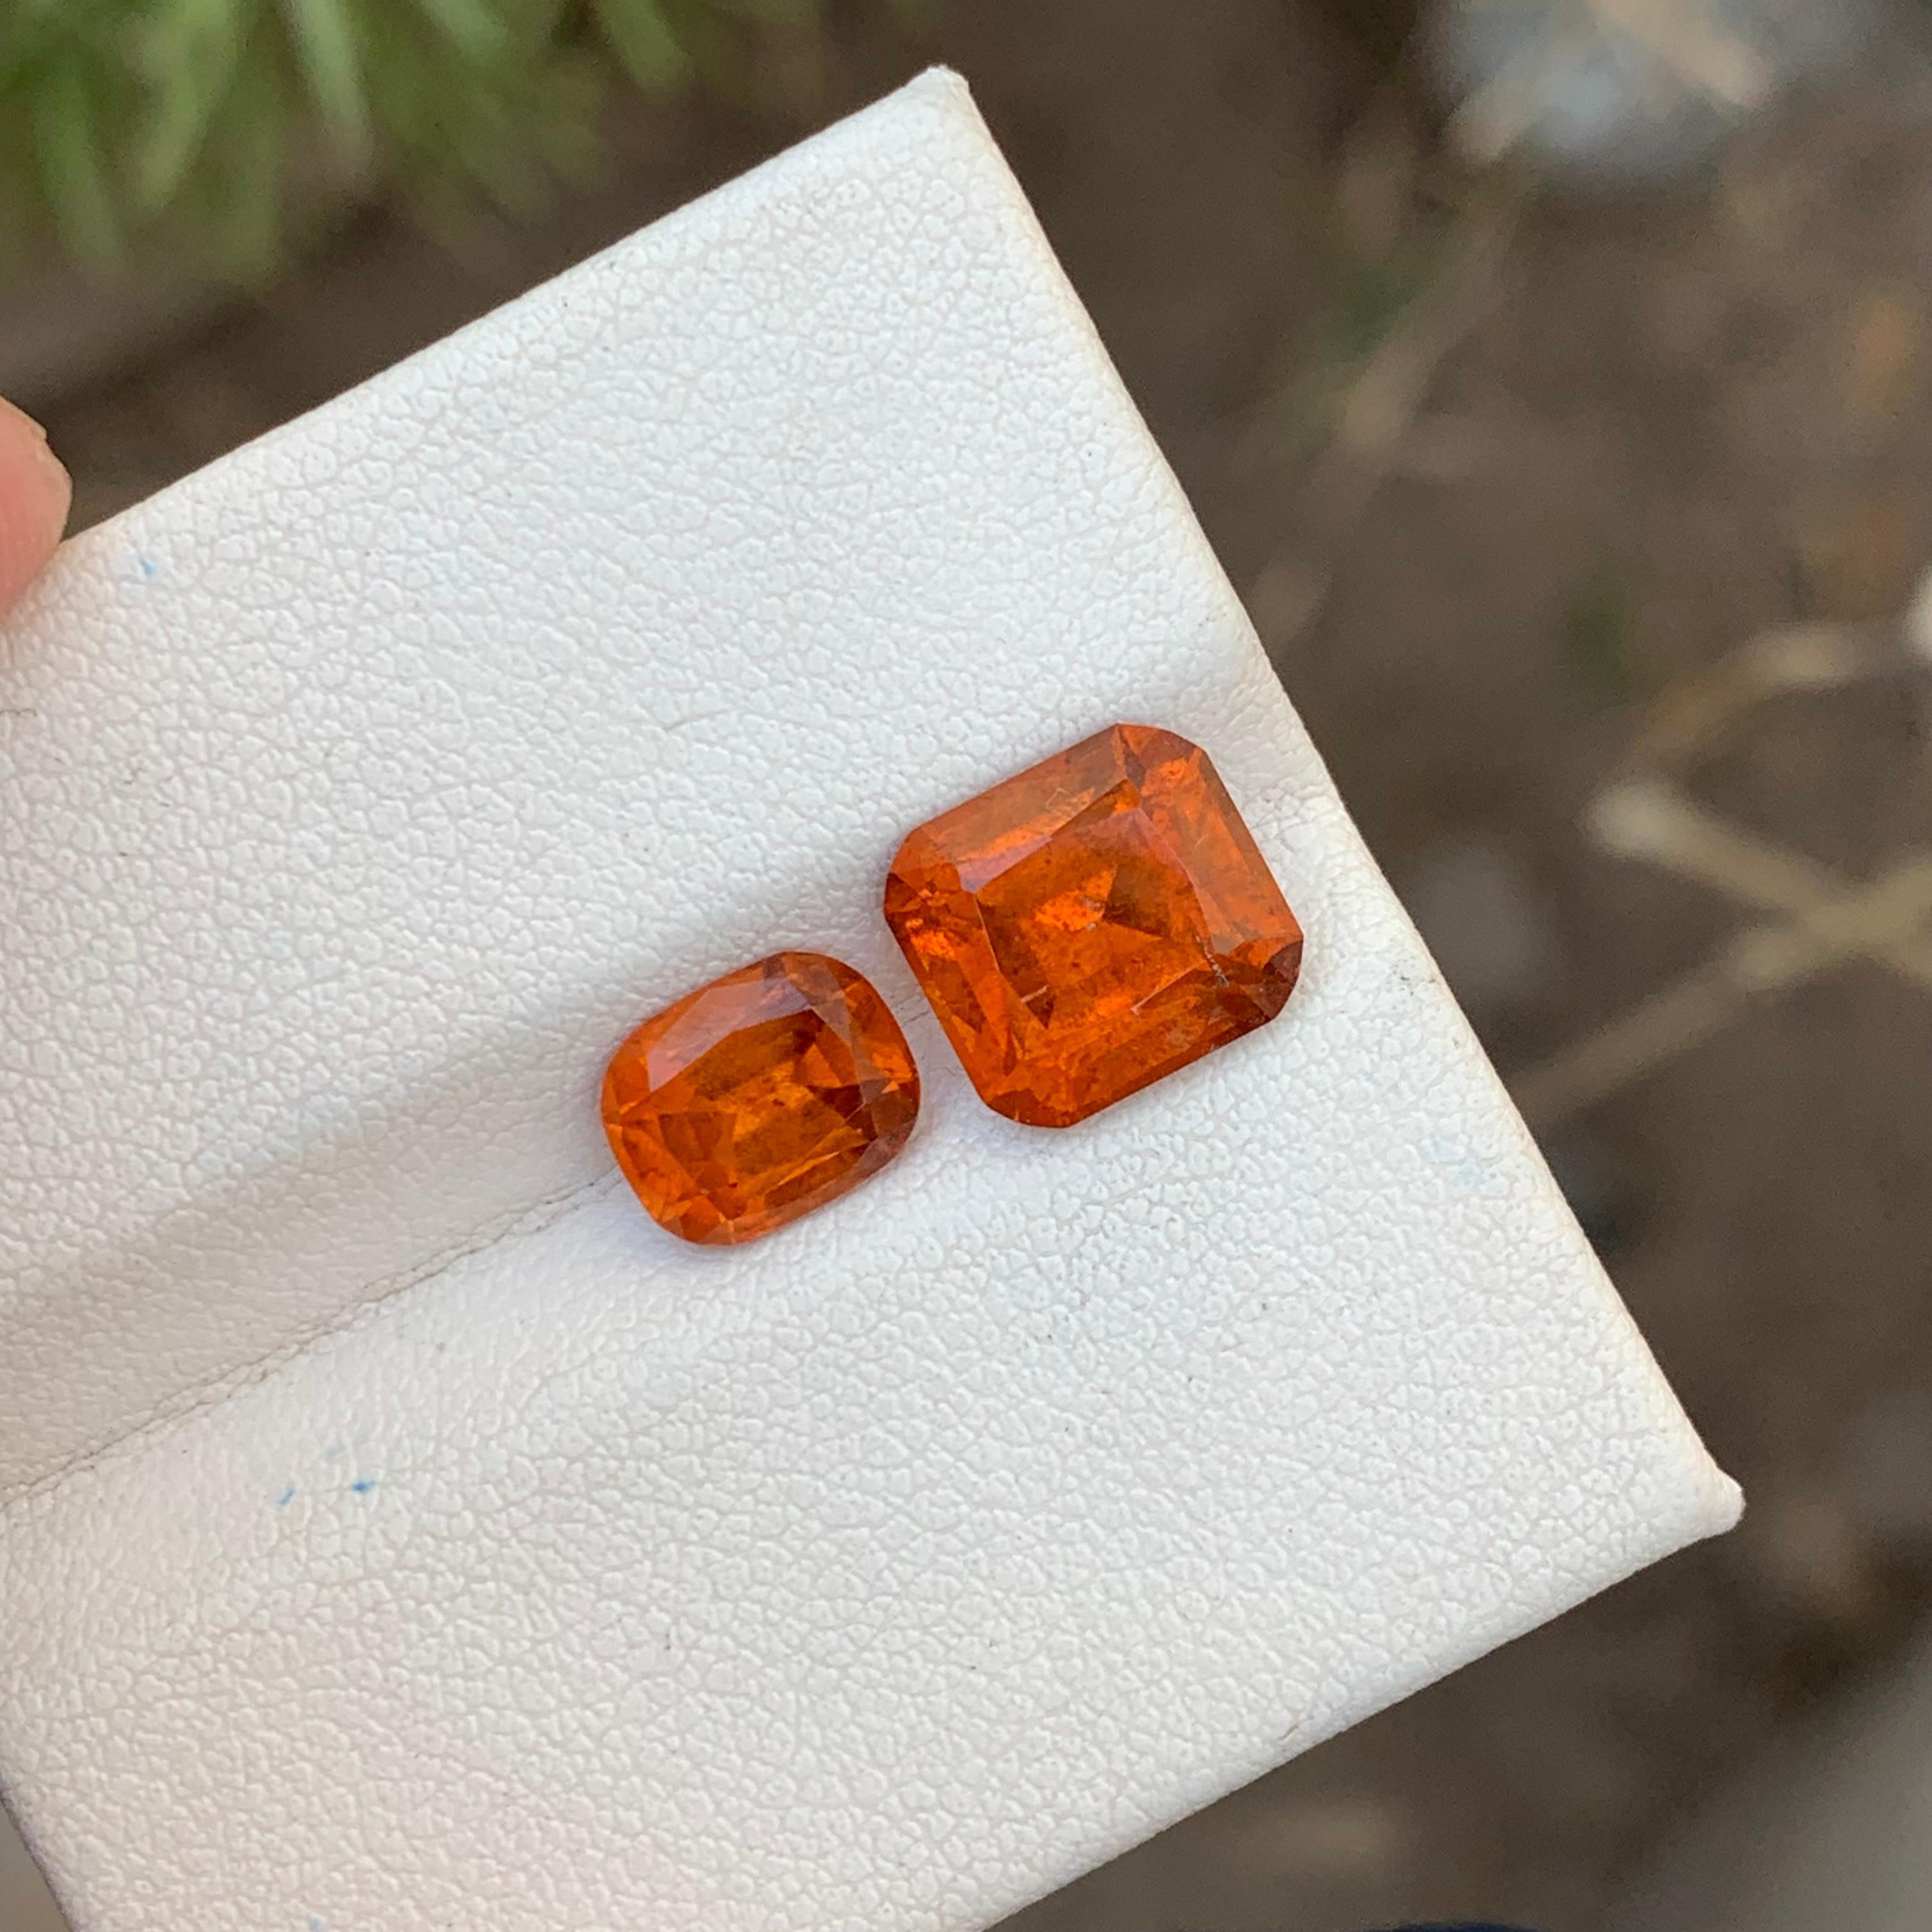 5.95 Carats Natural Loose Hessonite Garnet 2 Pieces For Ring Jewelry Making  en vente 3